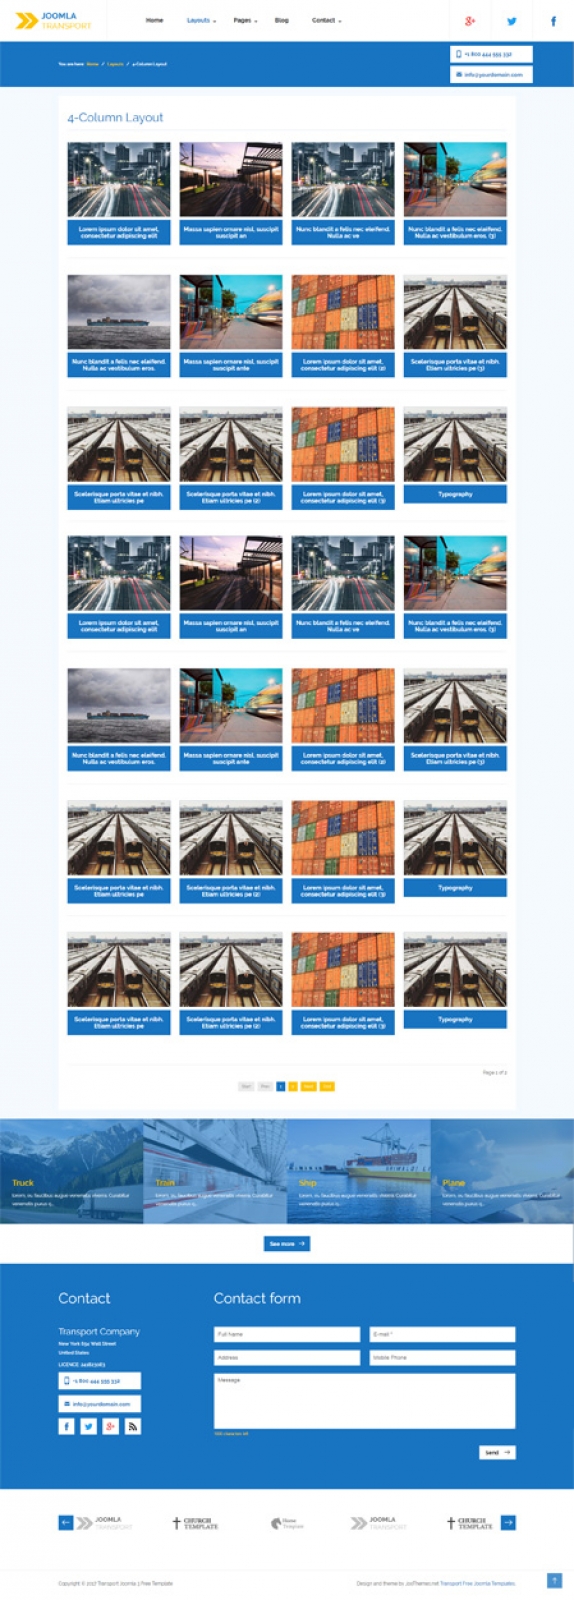 Transport Joomla 3 Free Template articles category layout
